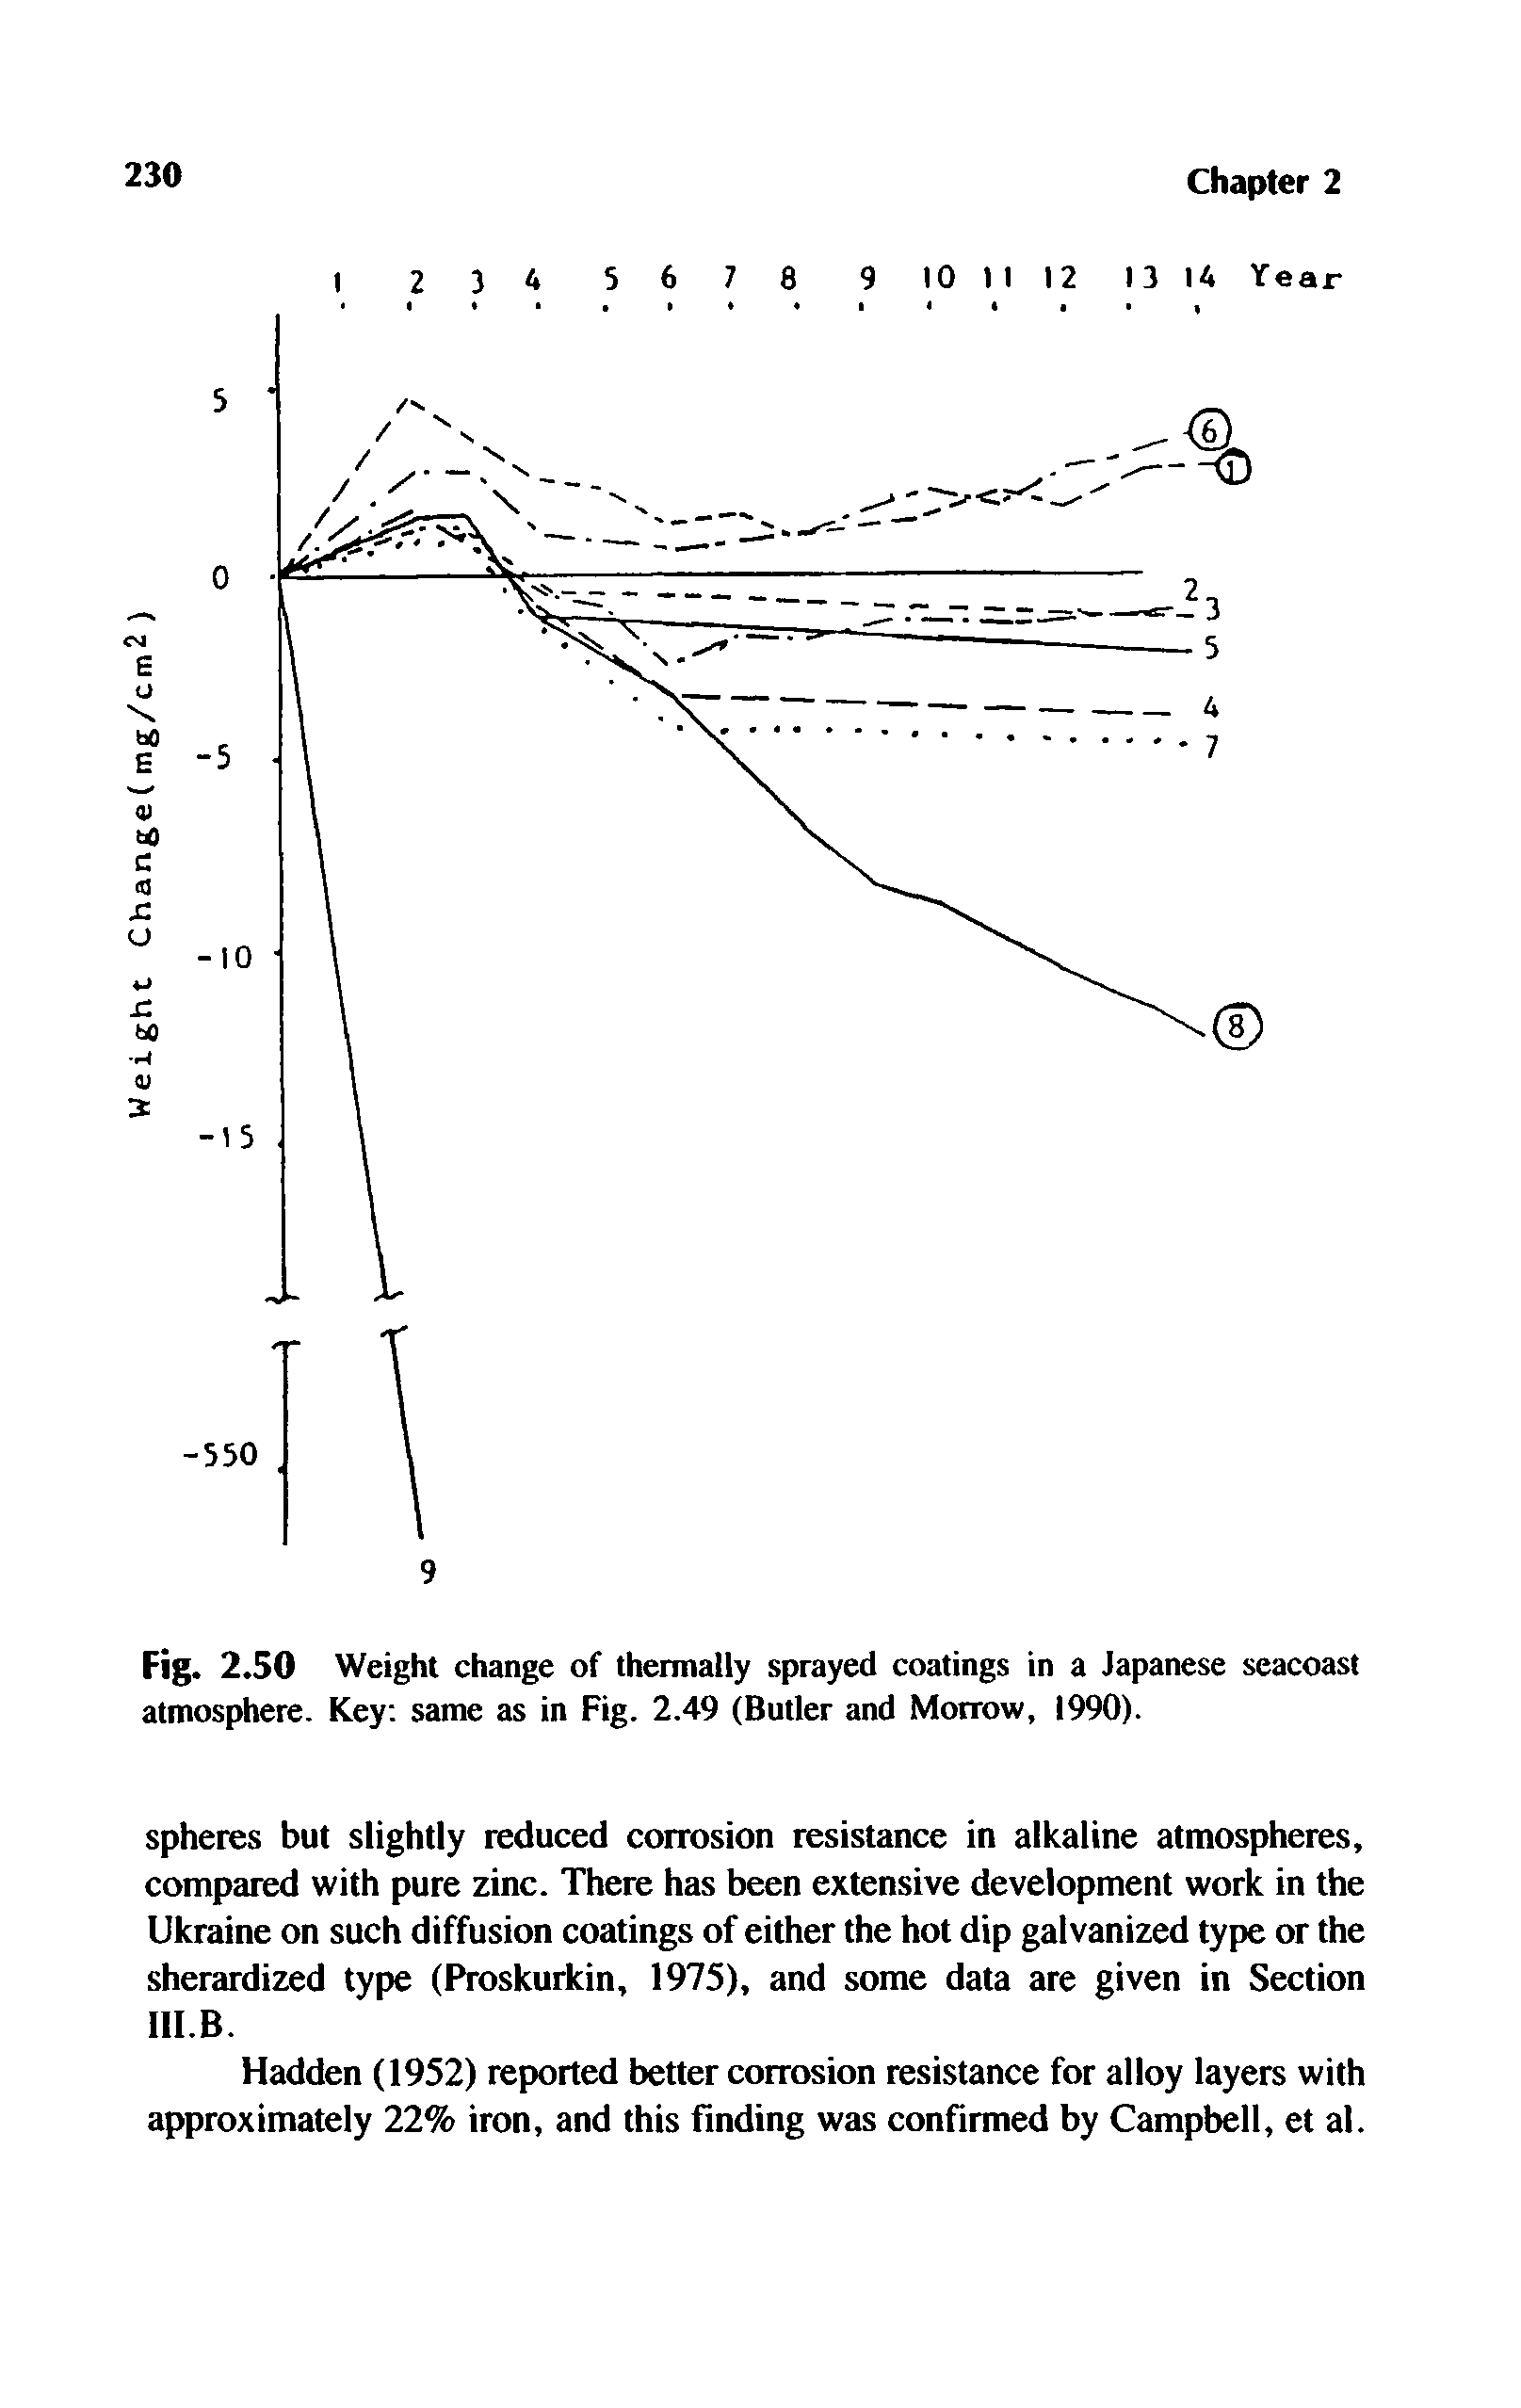 Fig. 2.50 Weight change of thermally sprayed coatings in a Japanese seacoast atmosphere. Key same as in Fig. 2.49 (Butler and Morrow, 1990).